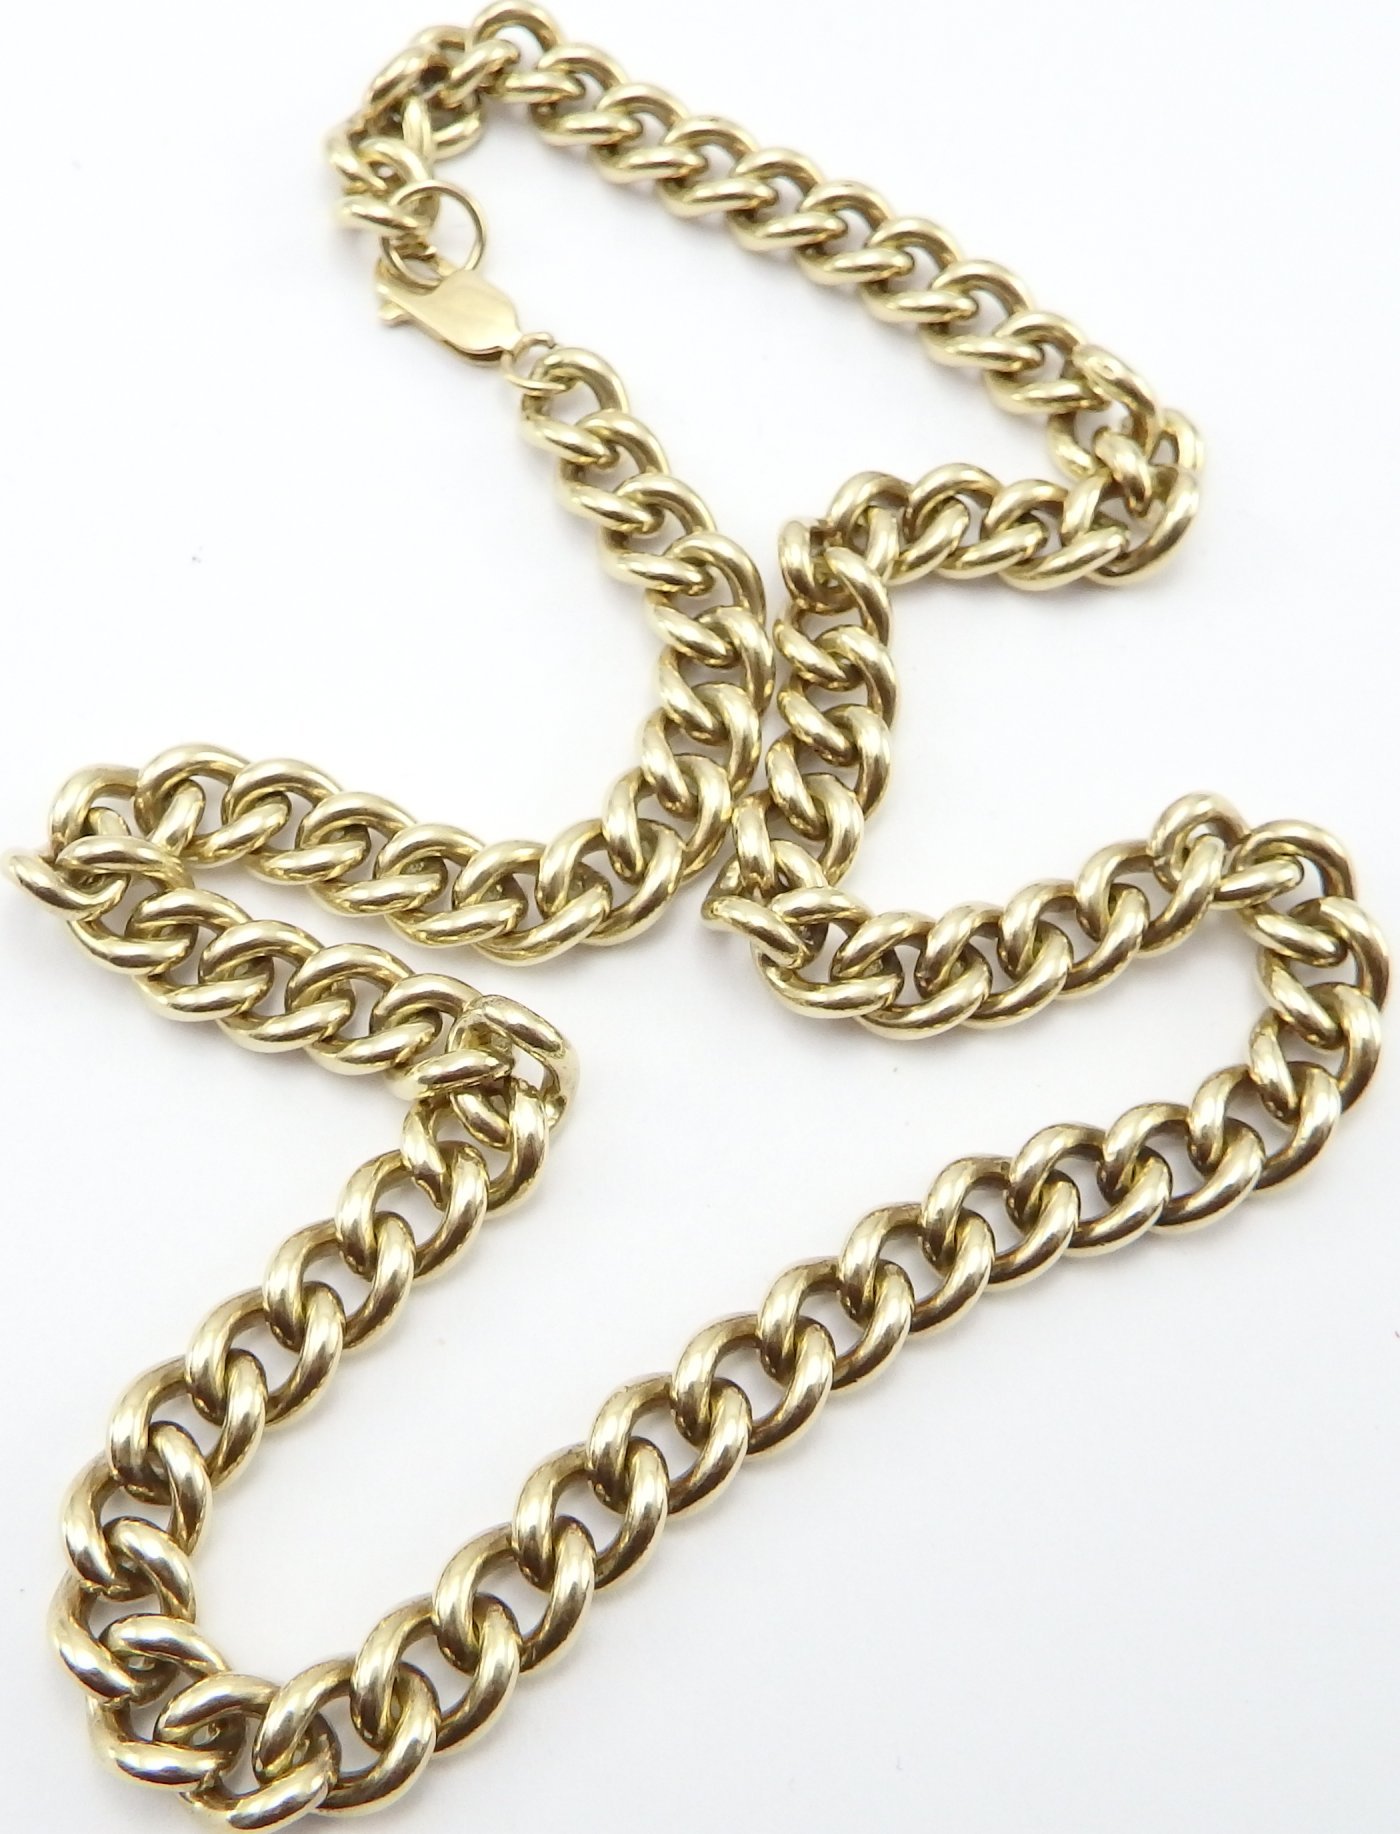 Heavy 9ct solid yellow gold 18 inch long hallmarked neck chain weighs ...